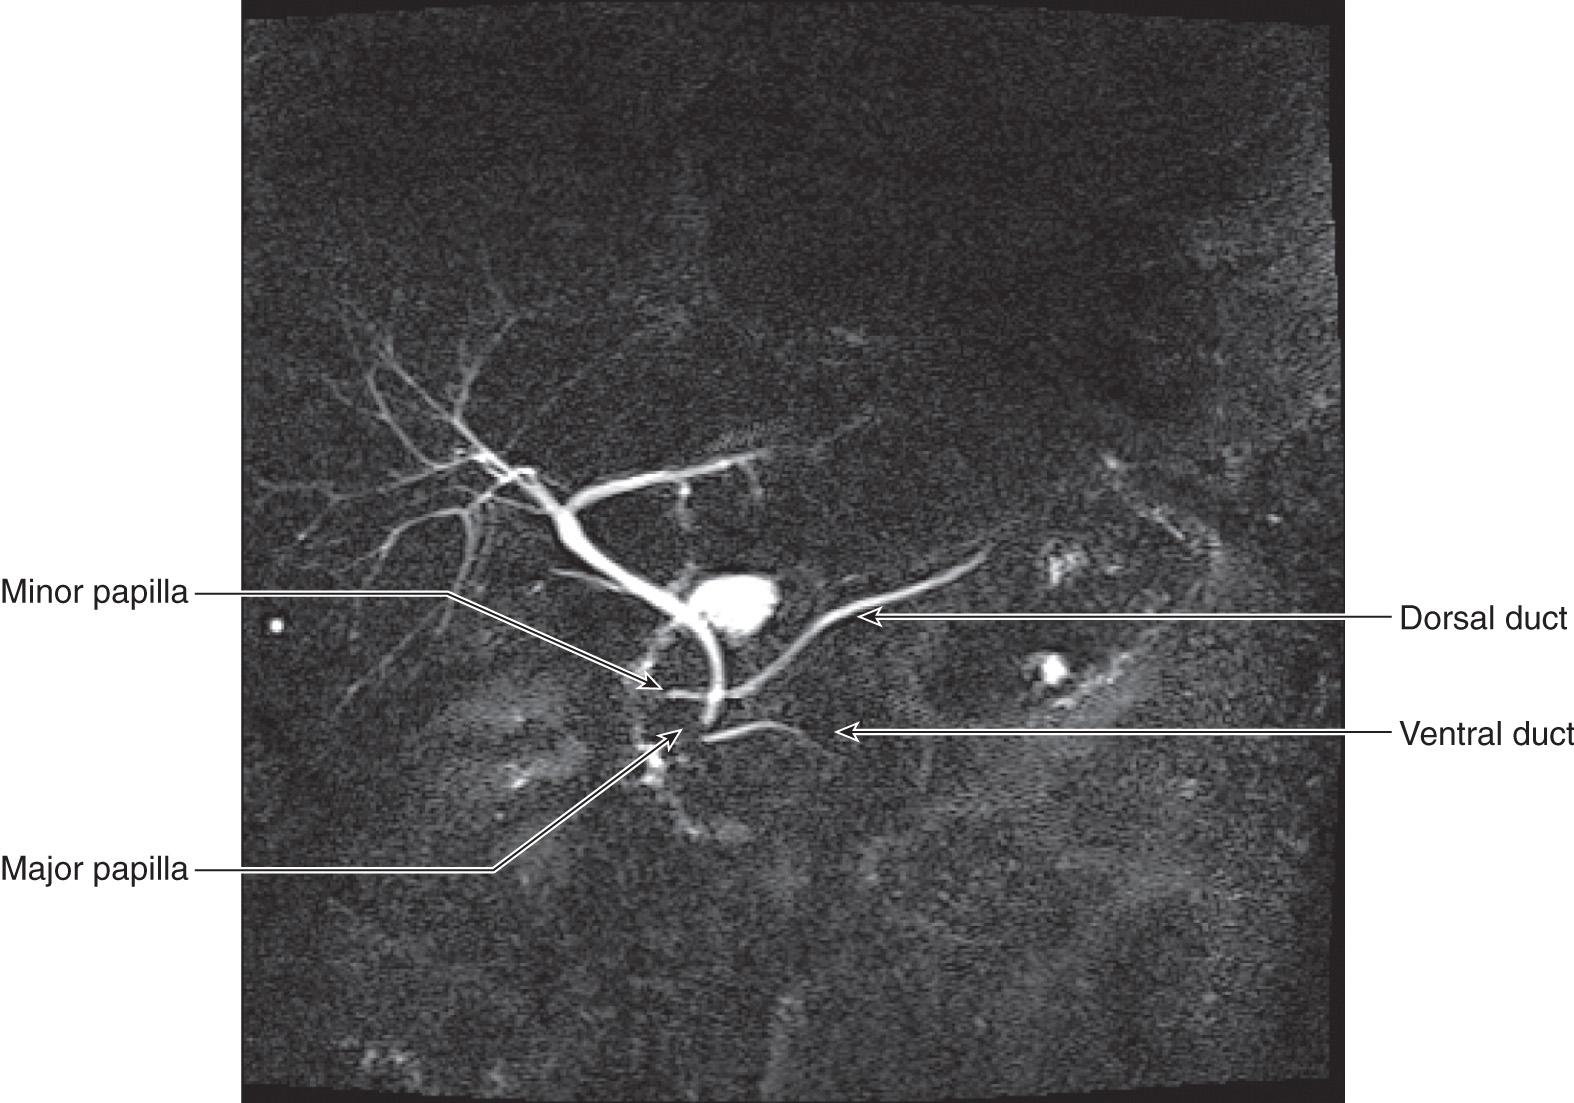 FIGURE 71.7, Magnetic resonance cholangiopancreatographic image demonstrating pancreas divisum with drainage of the dorsal duct through the minor papilla.